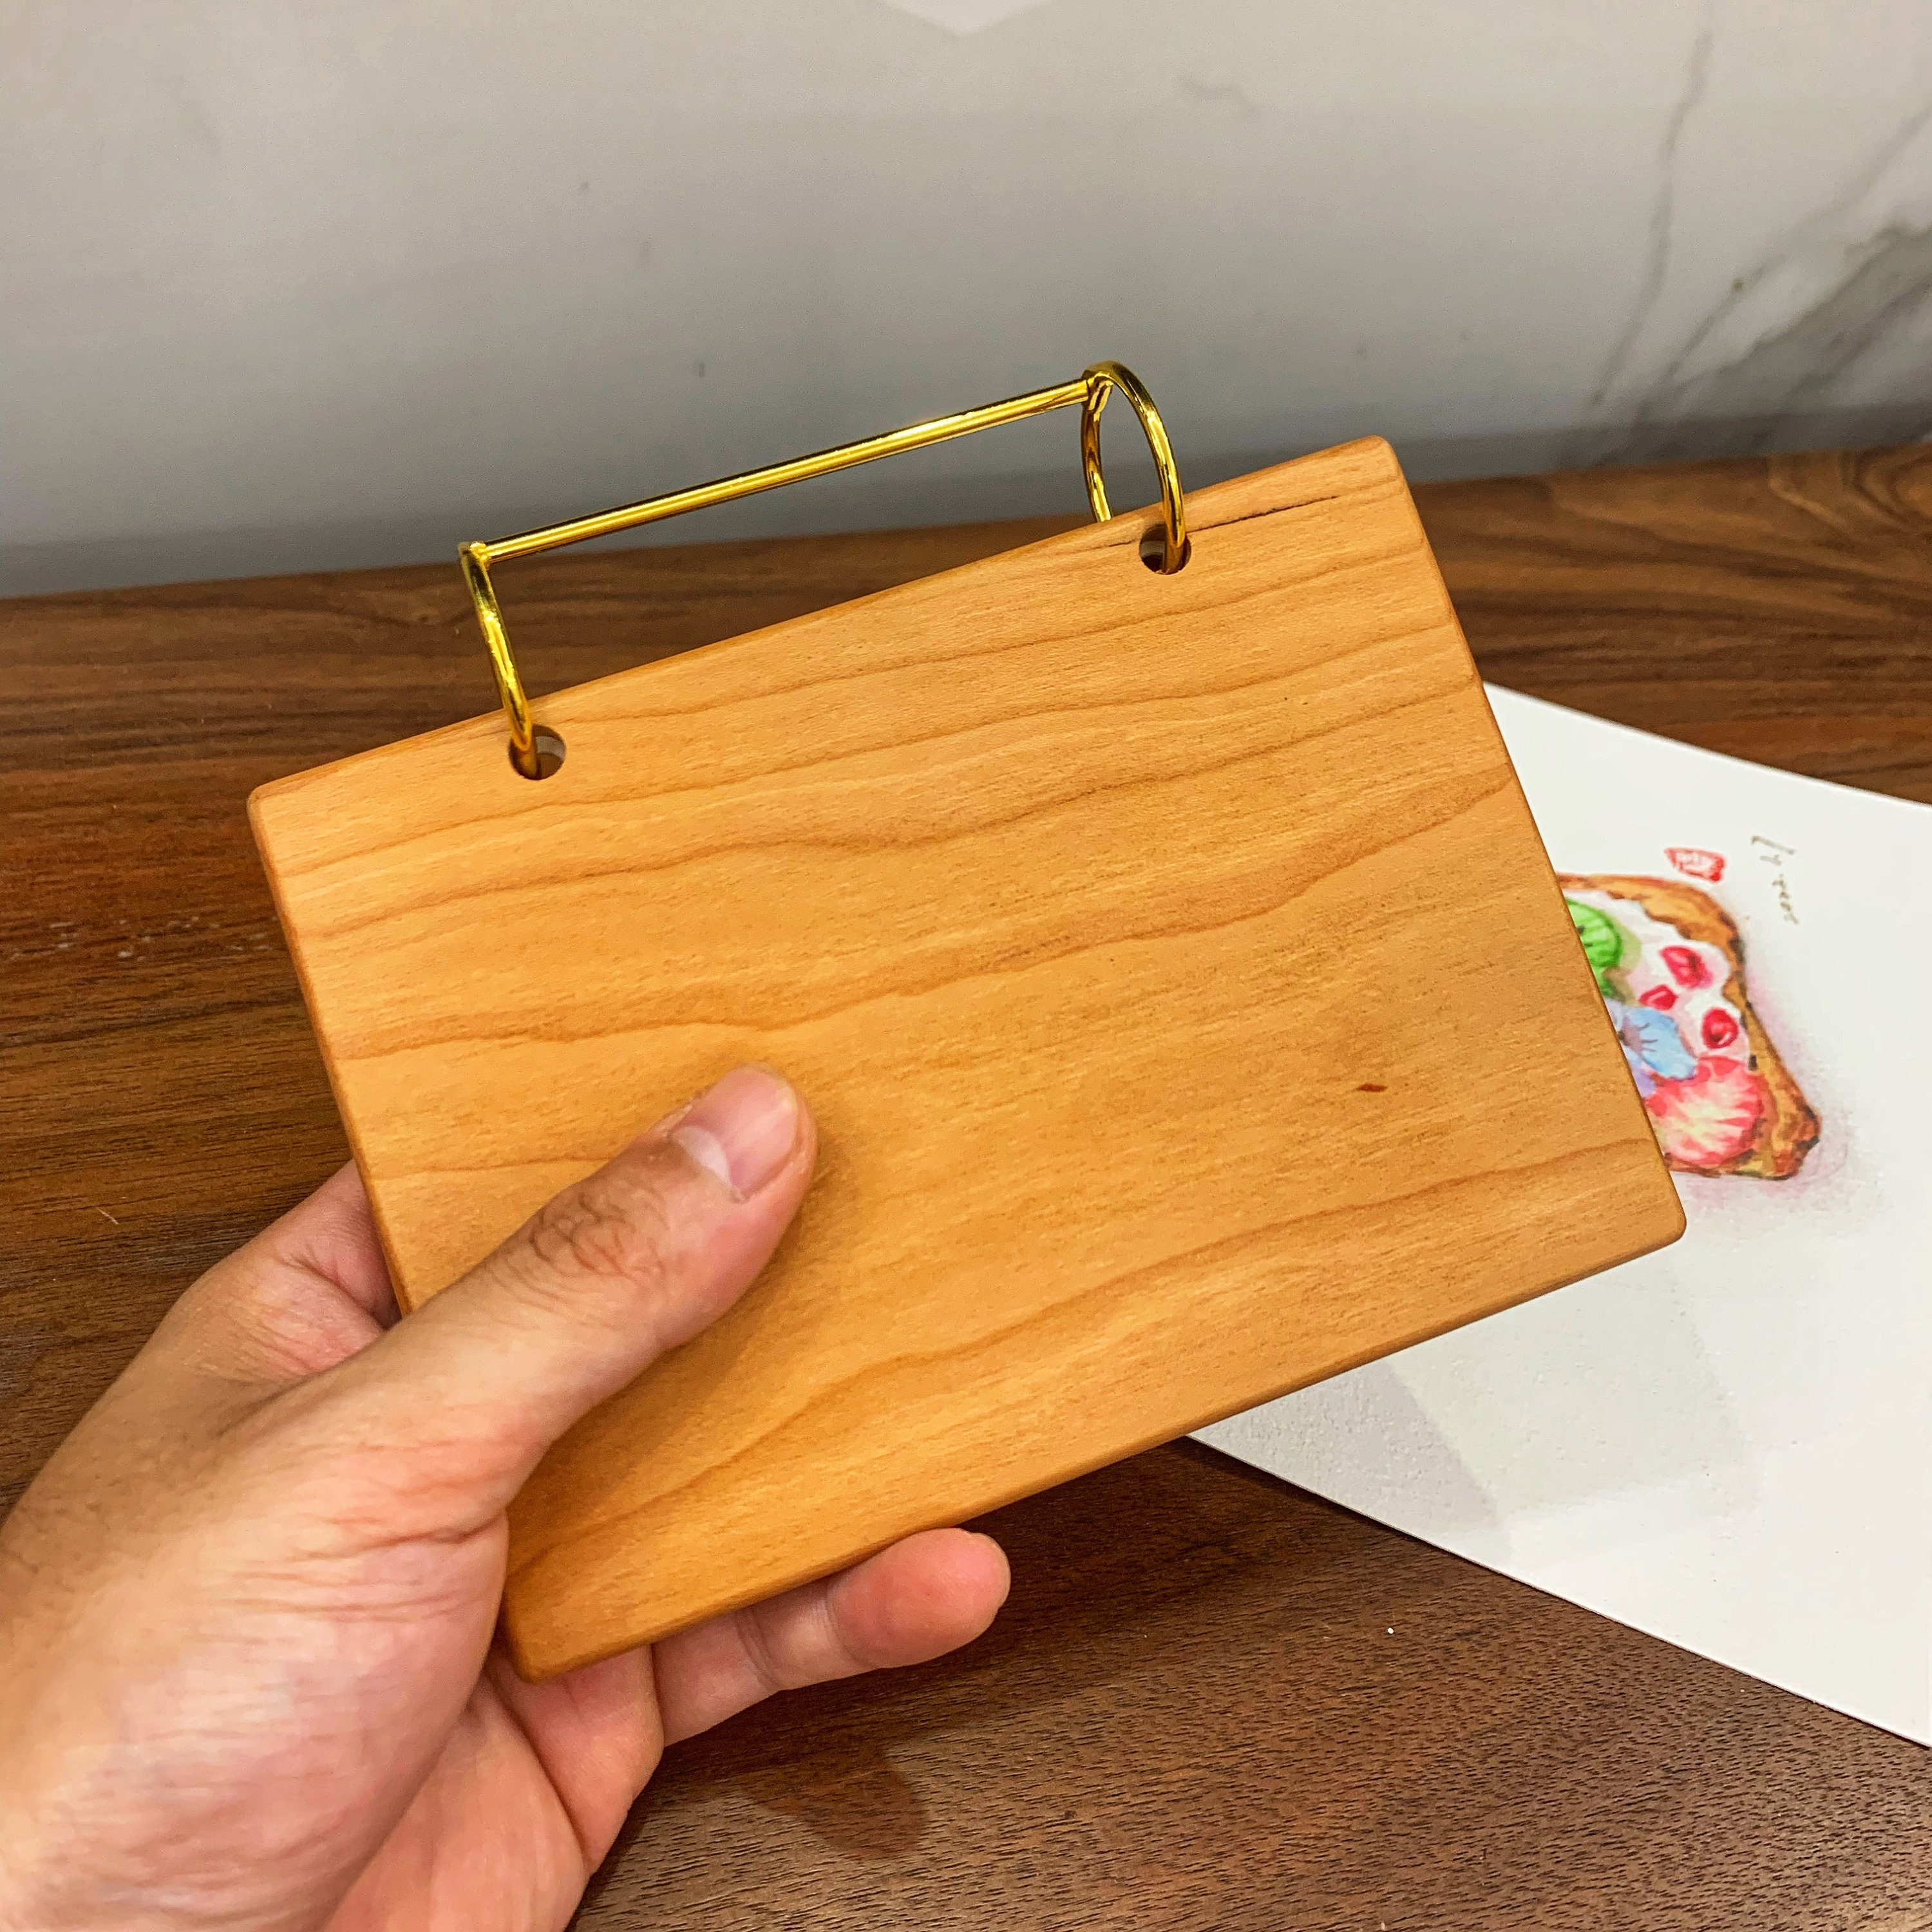 EJWQWQE Watercolor Notebook Portable Mini Pigment Tray Wooden Color  Watercolor Packaging Box Foldable Art Student Travel 